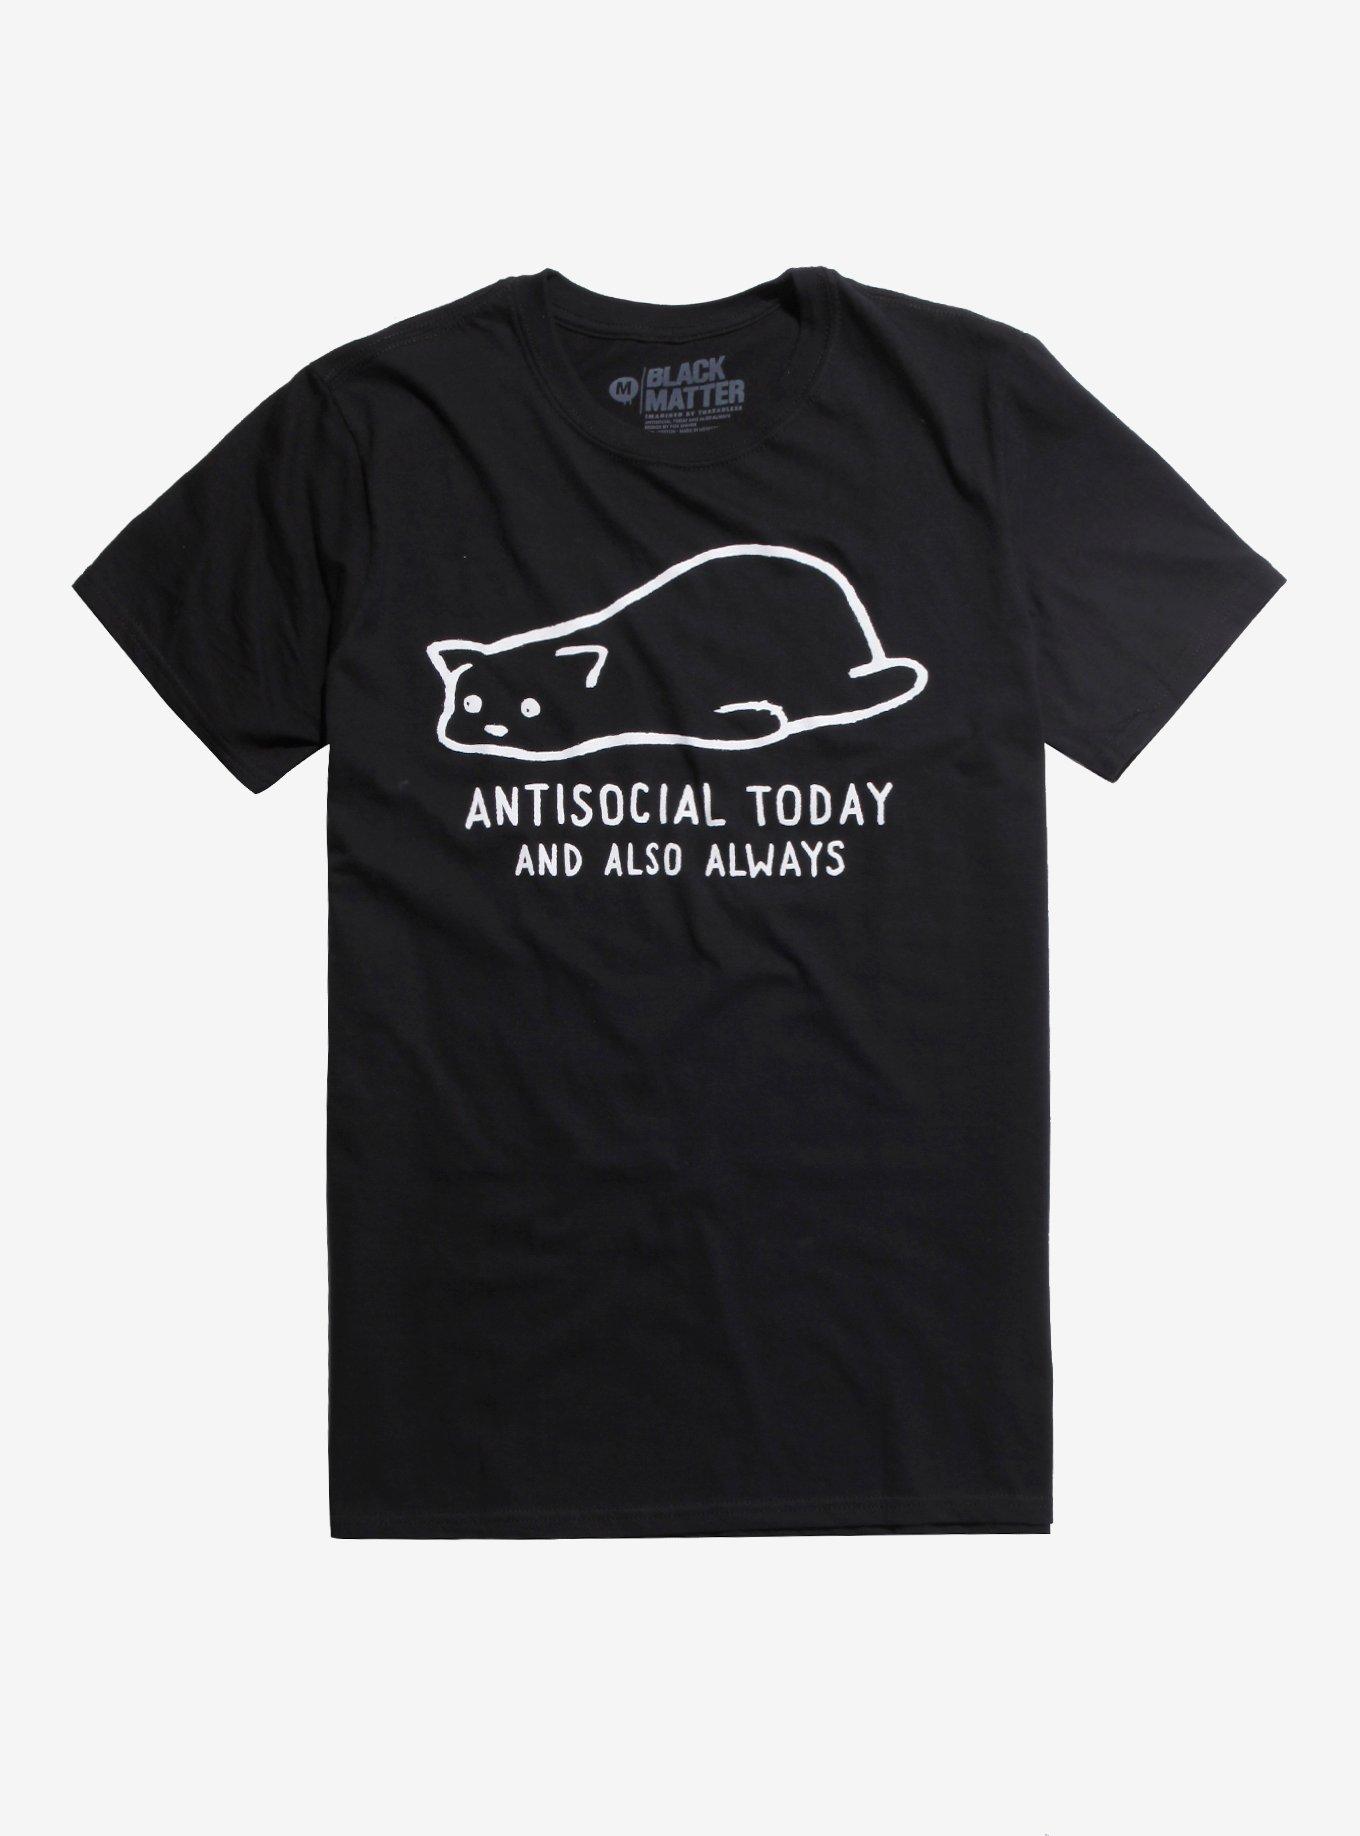 Antisocial Today And Also Always Cat T-Shirt, BLACK, hi-res